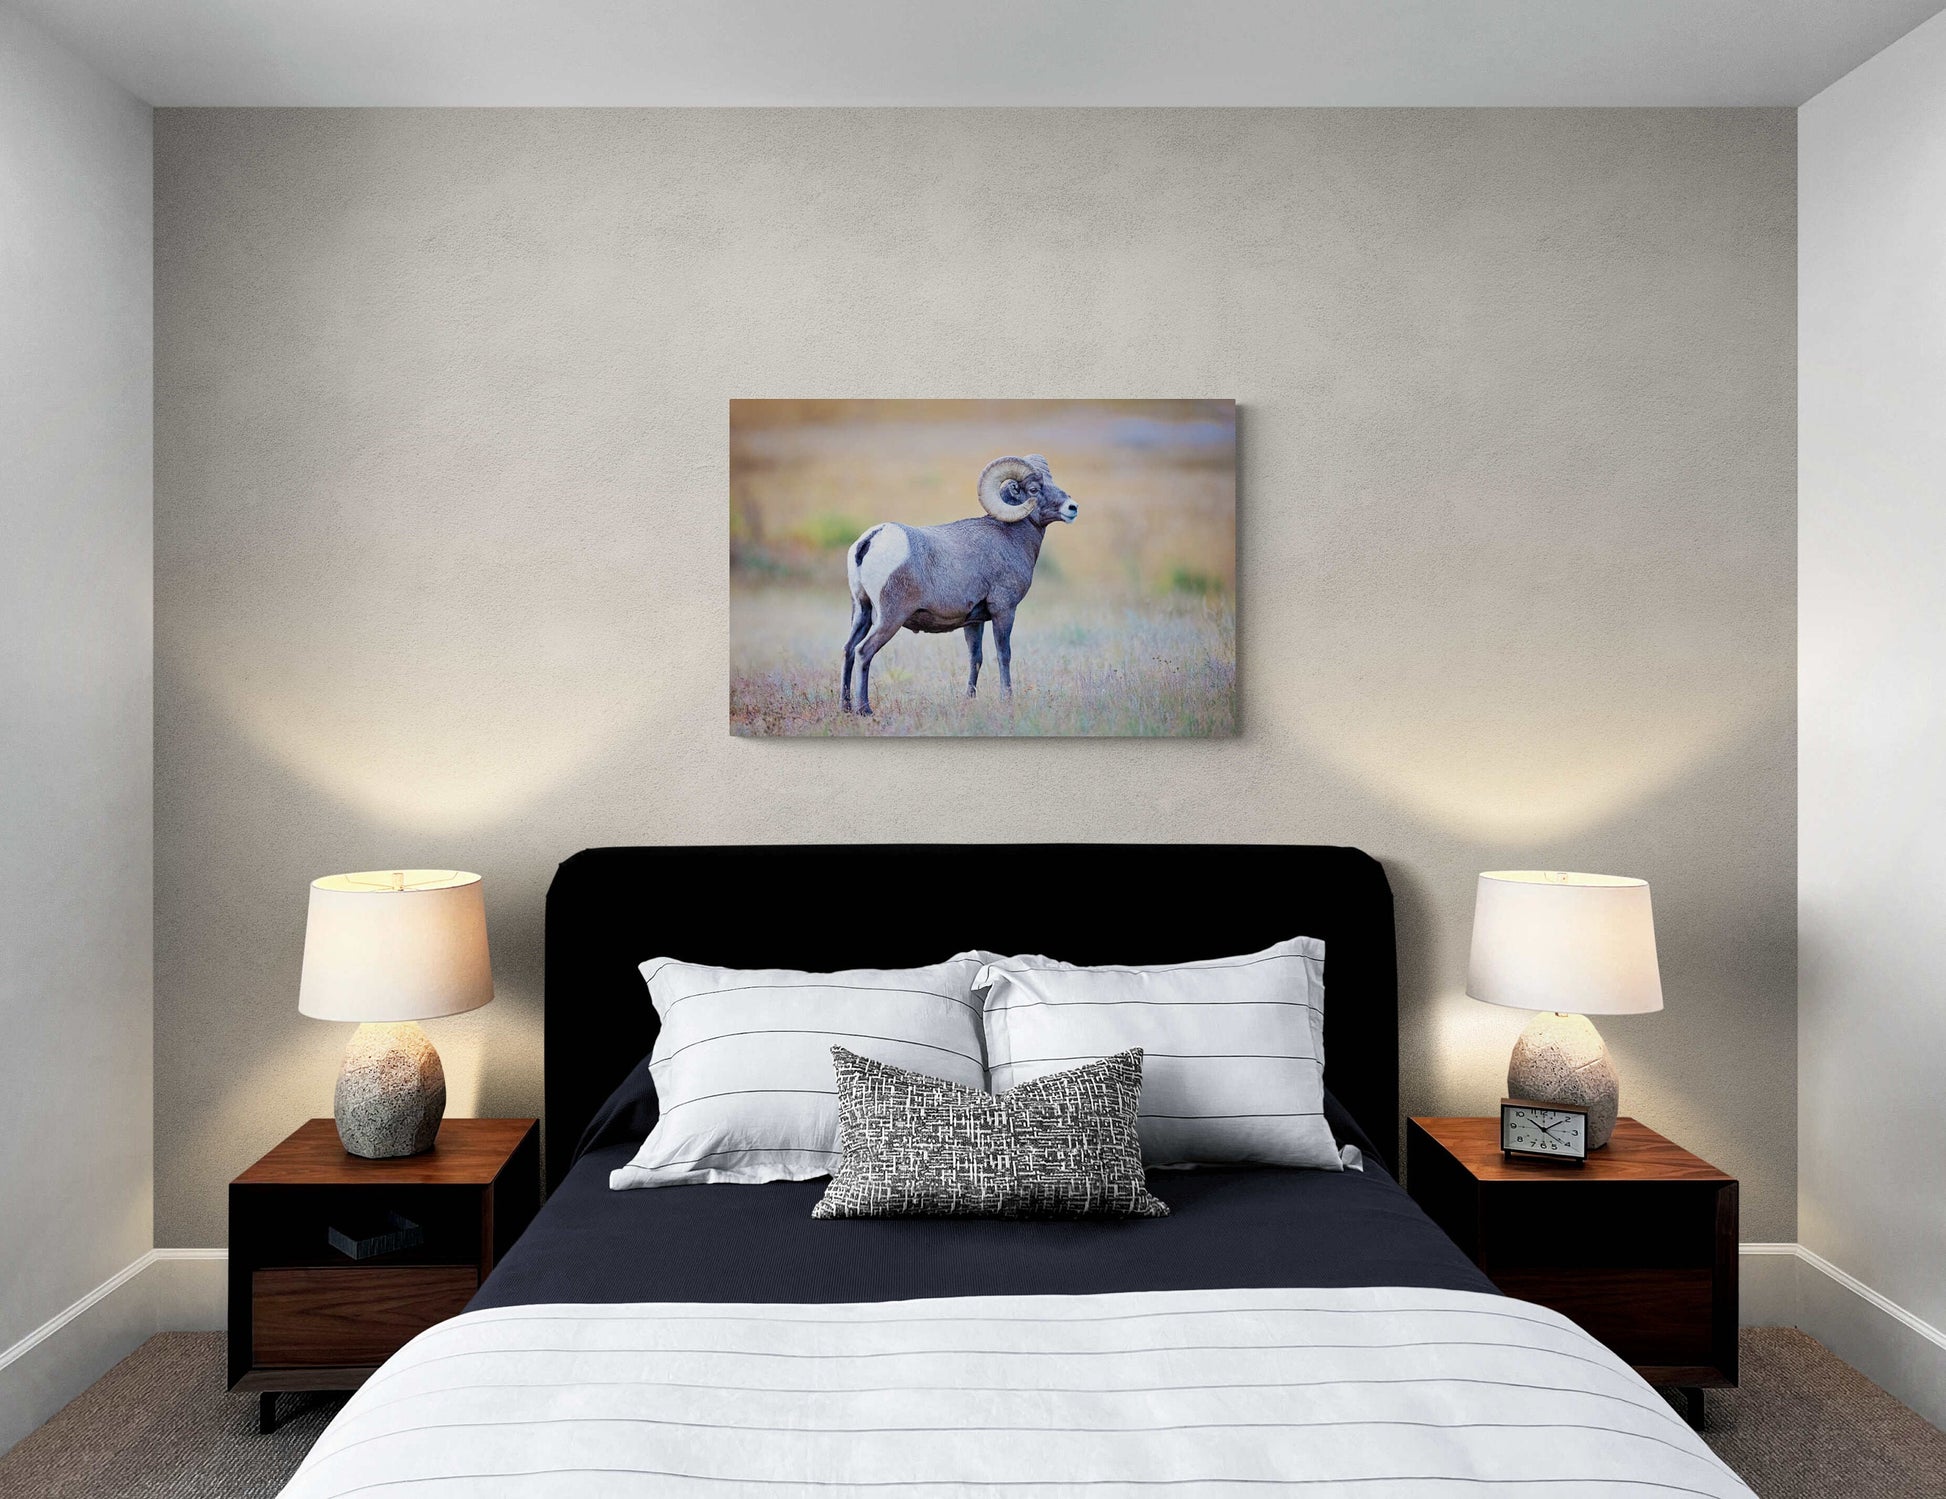 Big Horn Ram at Sheep's Lake, Wildlife Wall Canvas, Rocky Mountain National Park, Colorado Art Prints, Decor for Home and Office, Original